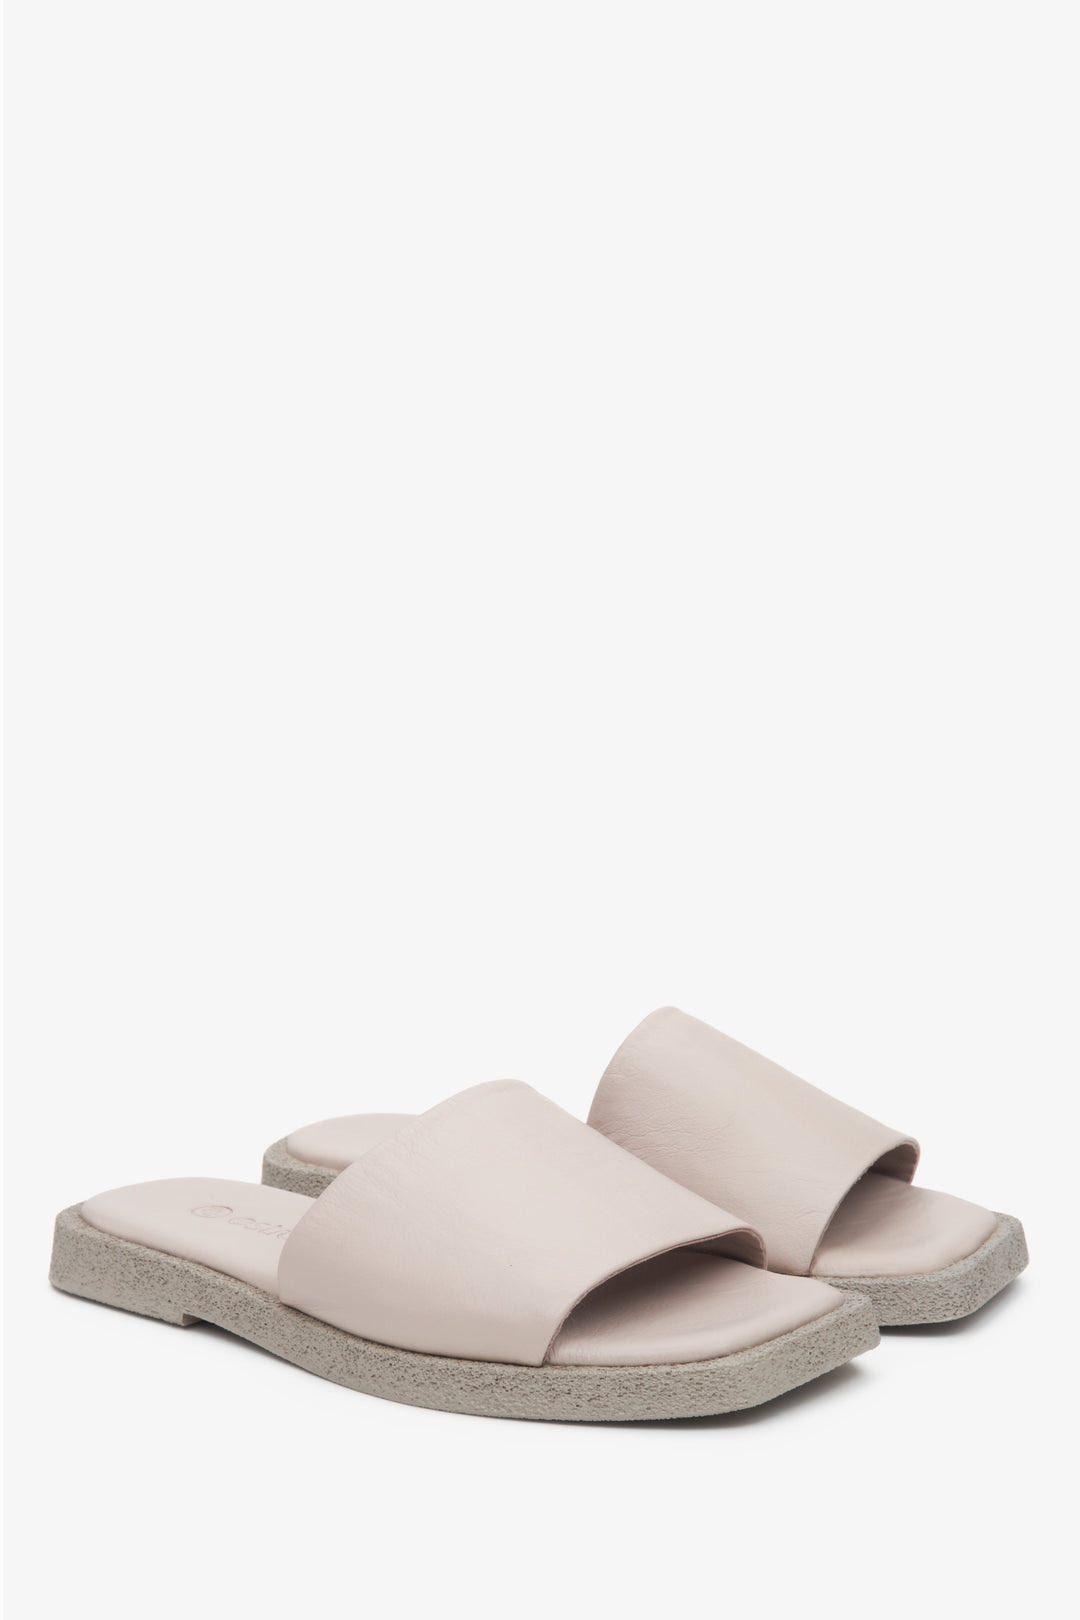 Women's beige slides made of Italian leather - presentation of the top and side seam of the shoes.